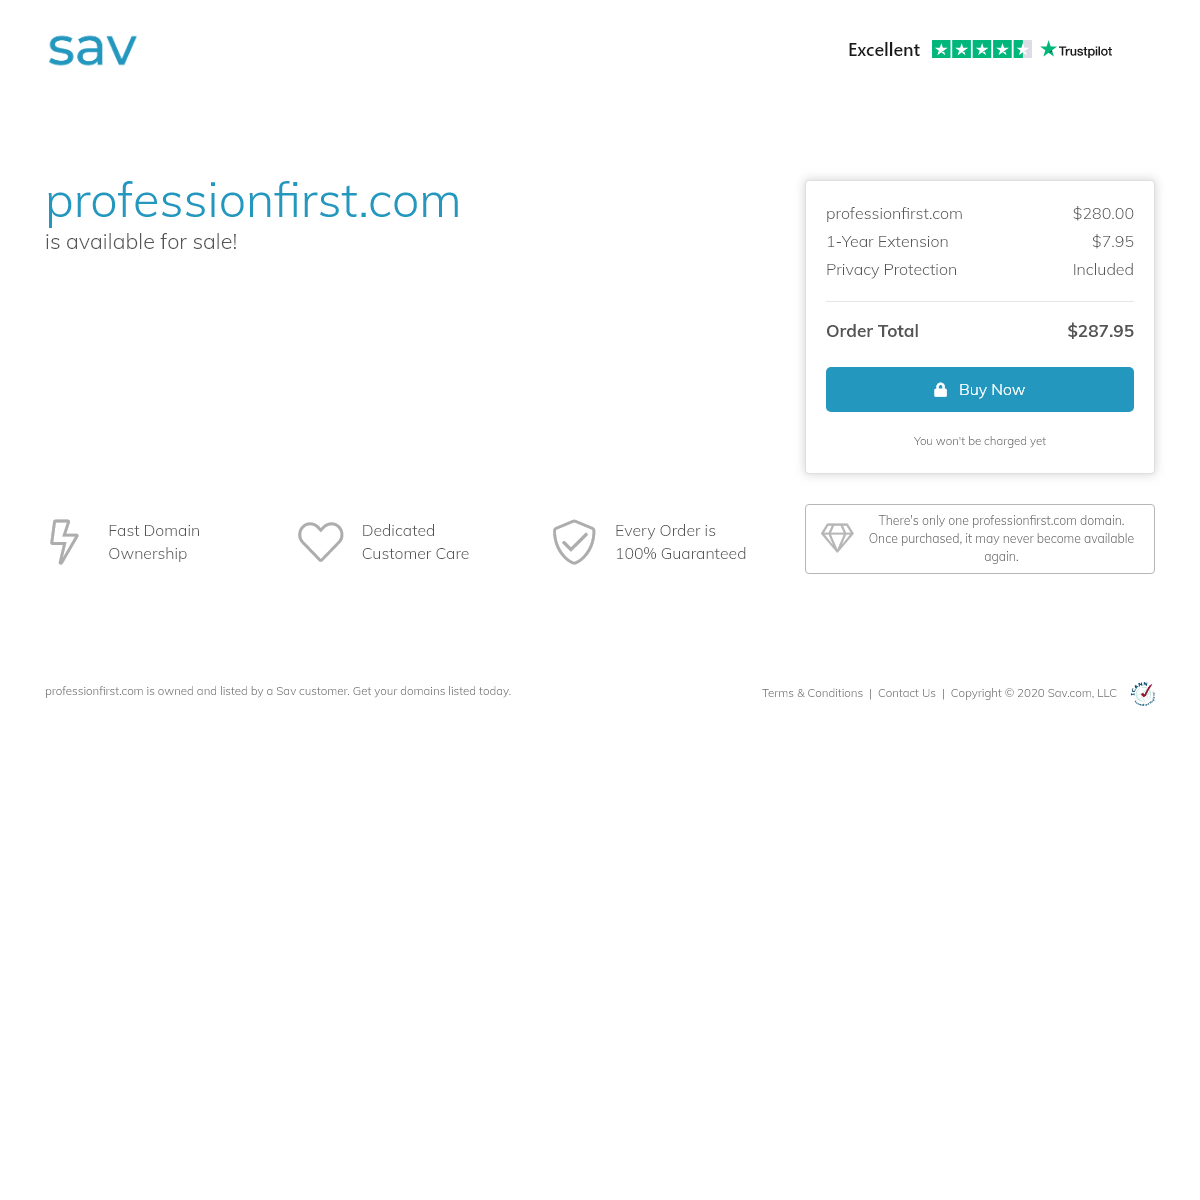 professionfirst.com Is for Sale